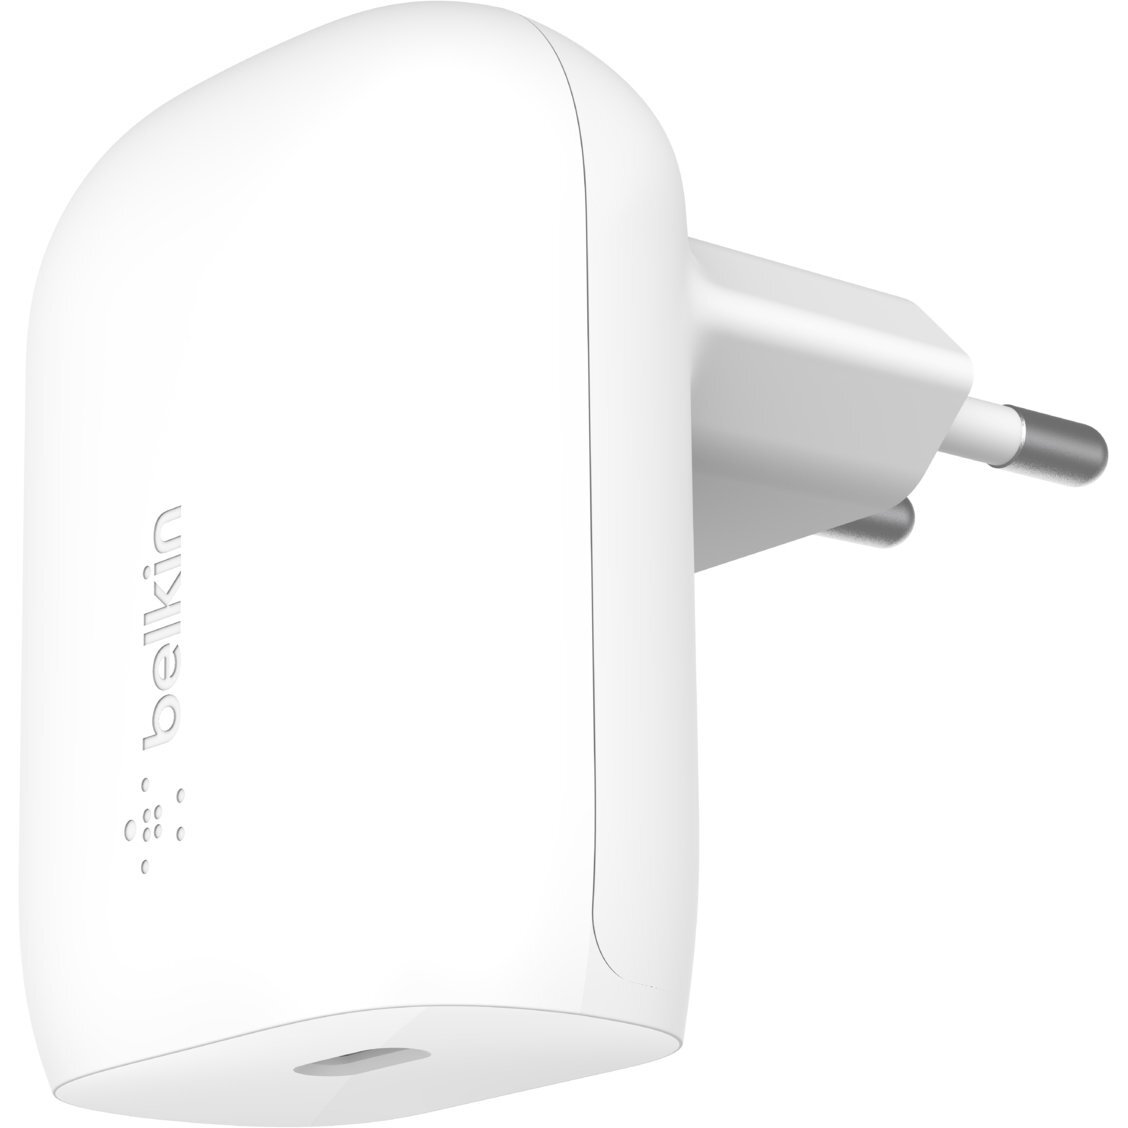 Сетевое ЗУ Belkin Home Charger 30W PD PPS USB-С (WCA005VFWH) фото 